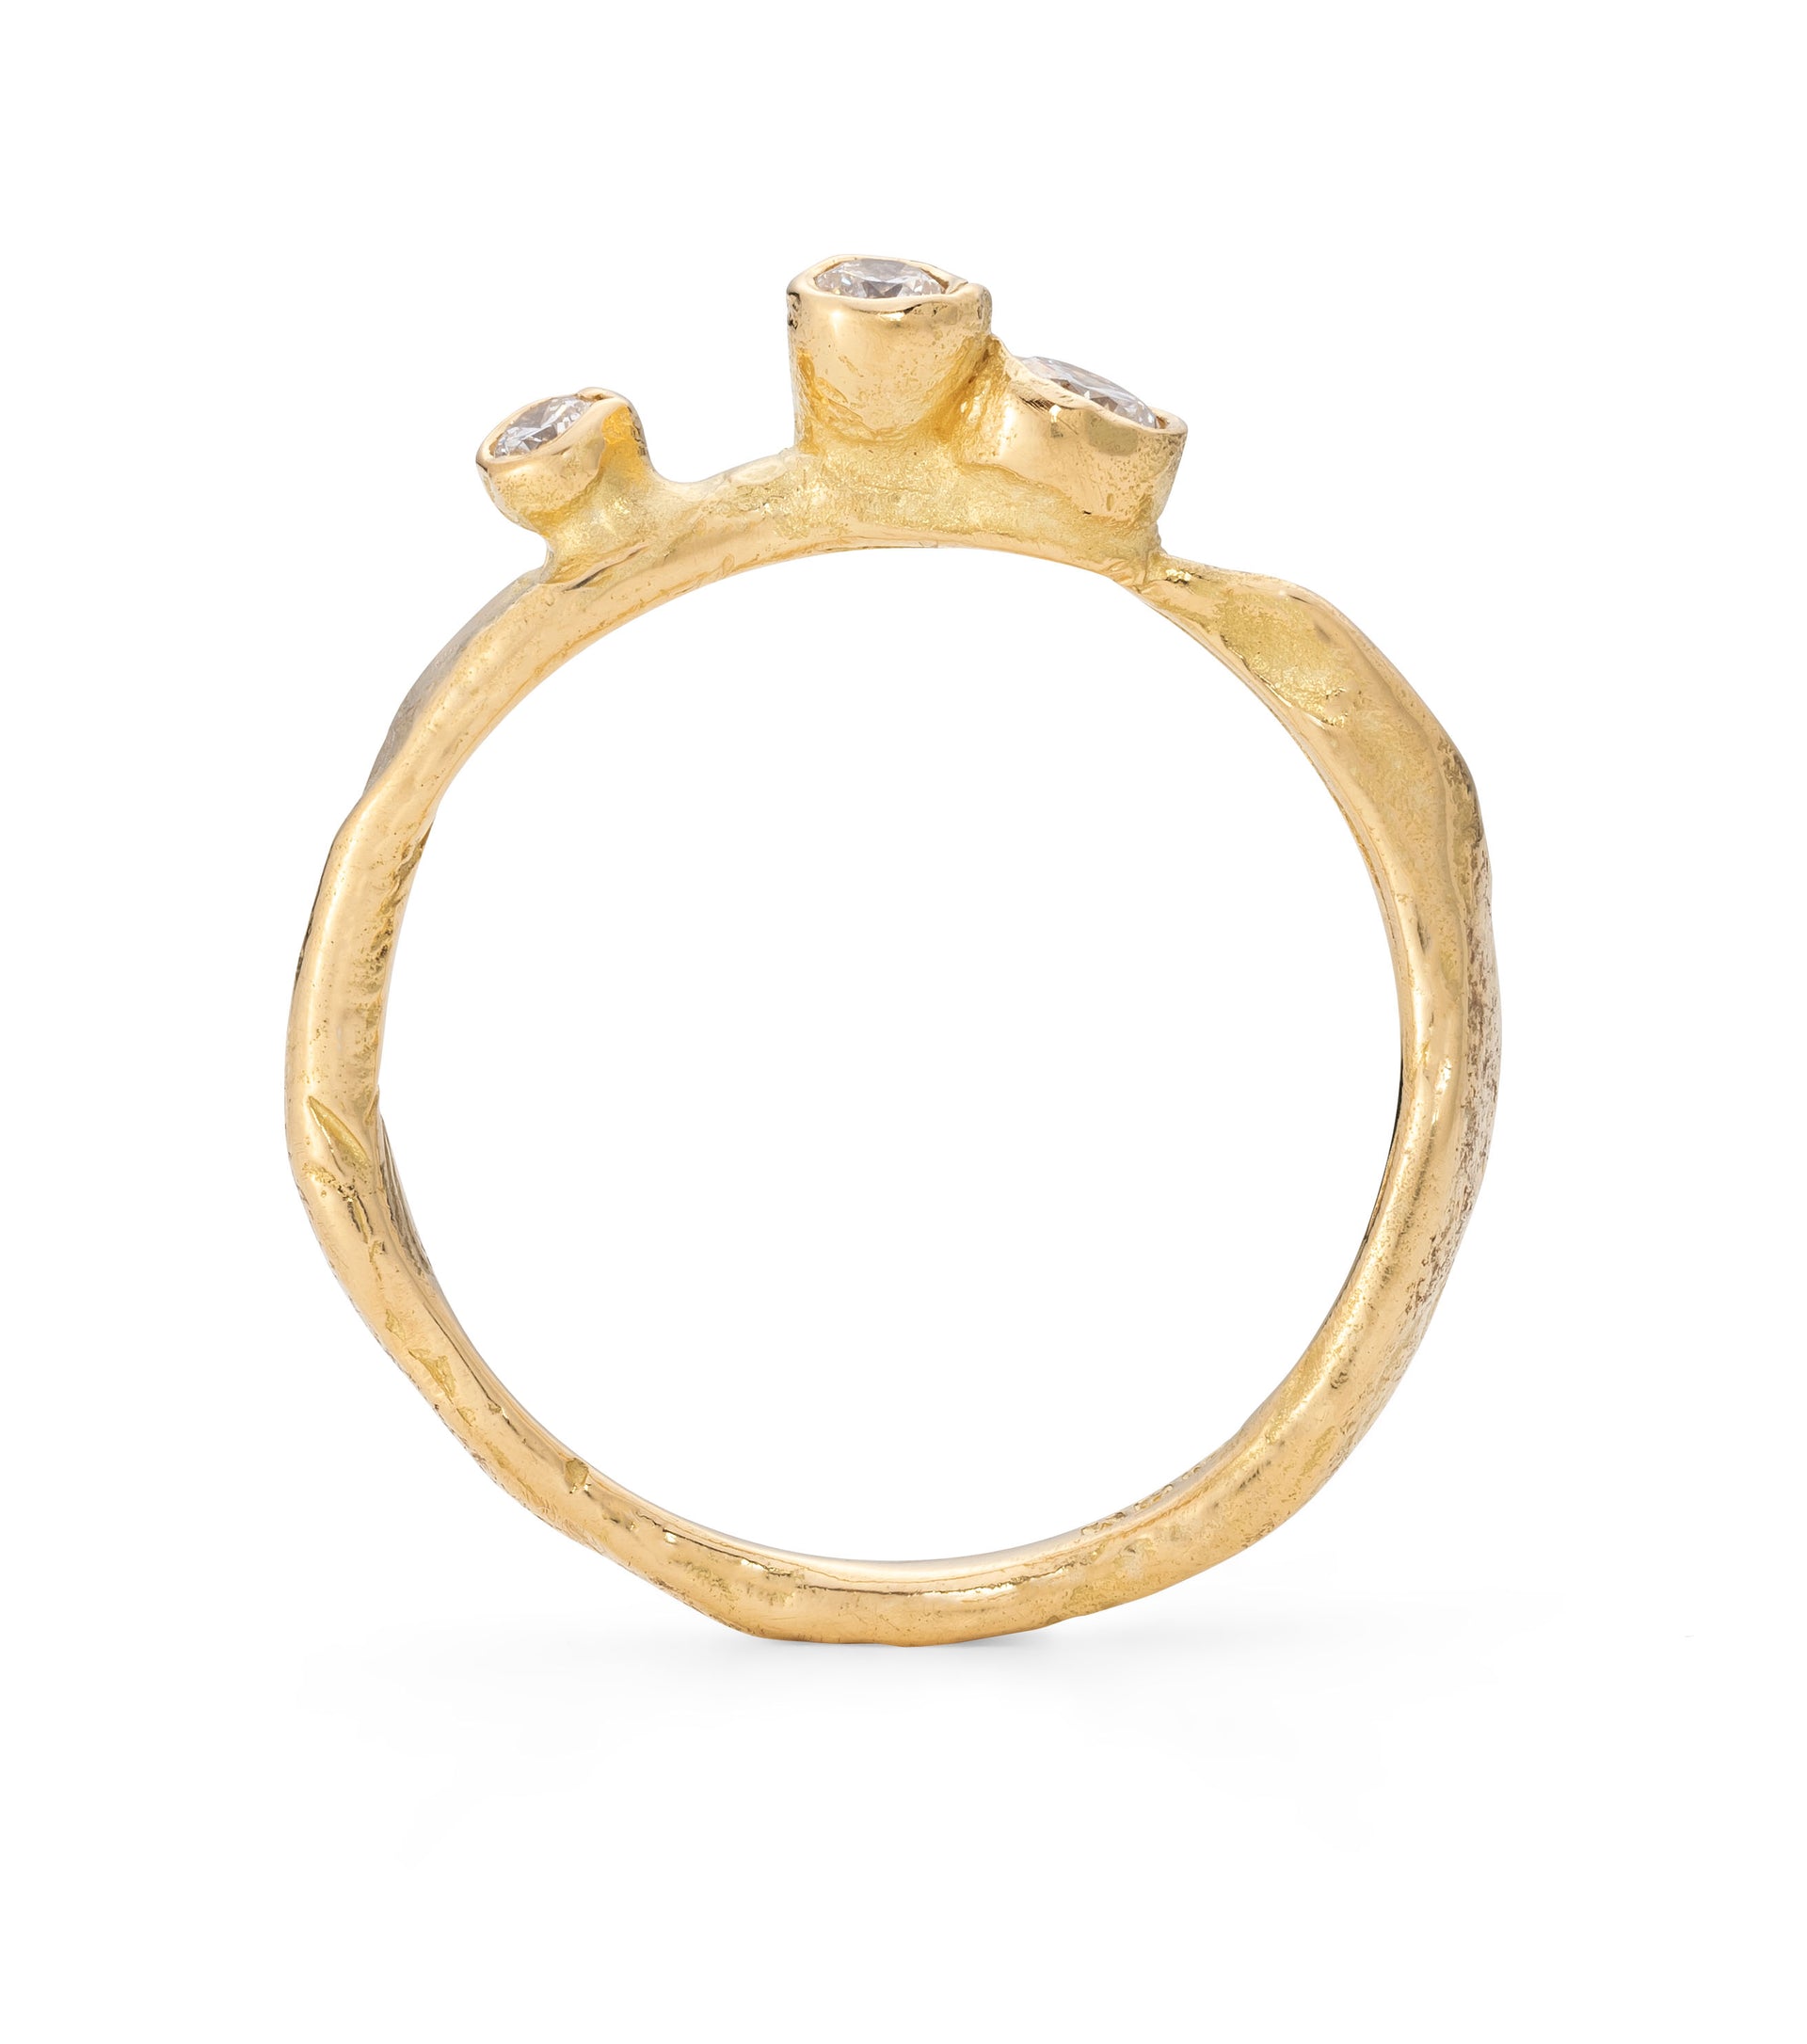 Side profile of an 18ct gold and diamond engagement ring, handcrafted by Emily Nixon in Cornwall.